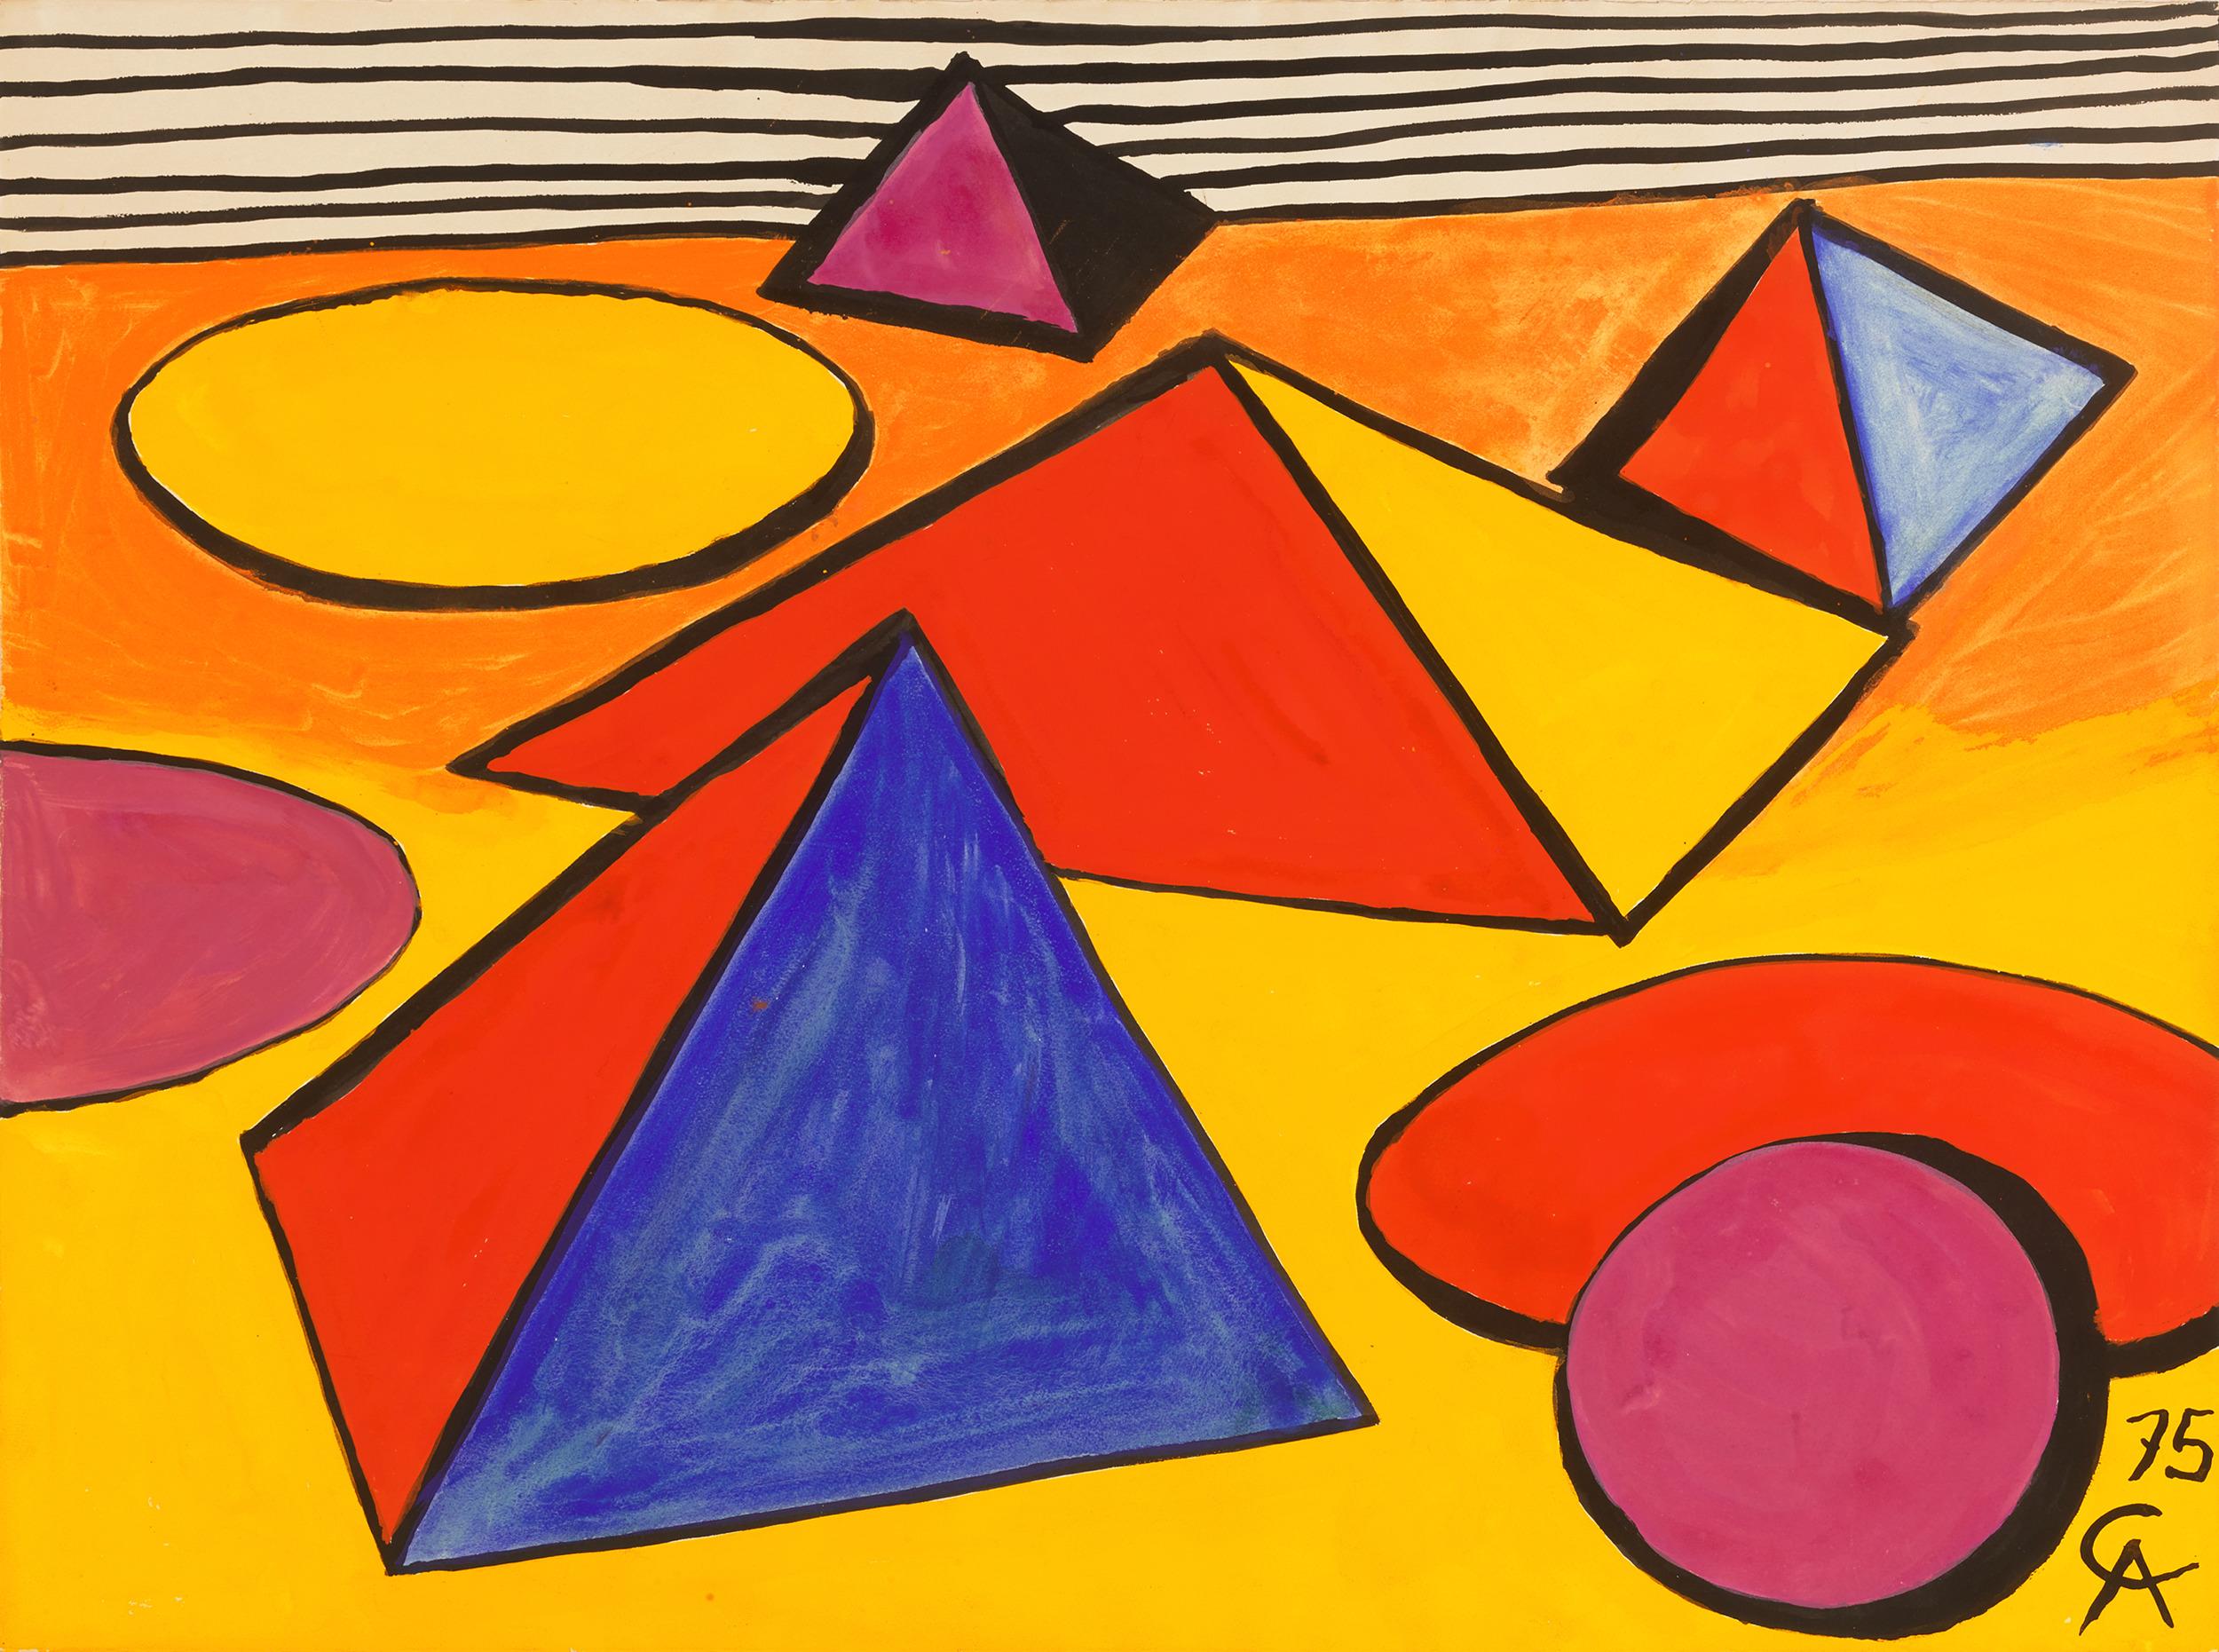 Alexander Calder
1898 – 1976  American

Mer de sable
(Sea of sand)

Gouache and ink on paper
Signed and dated with artist’s monogram “CA and ‘75” (lower right)

This vibrant gouache and ink on paper is the work of esteemed modern master, Alexander